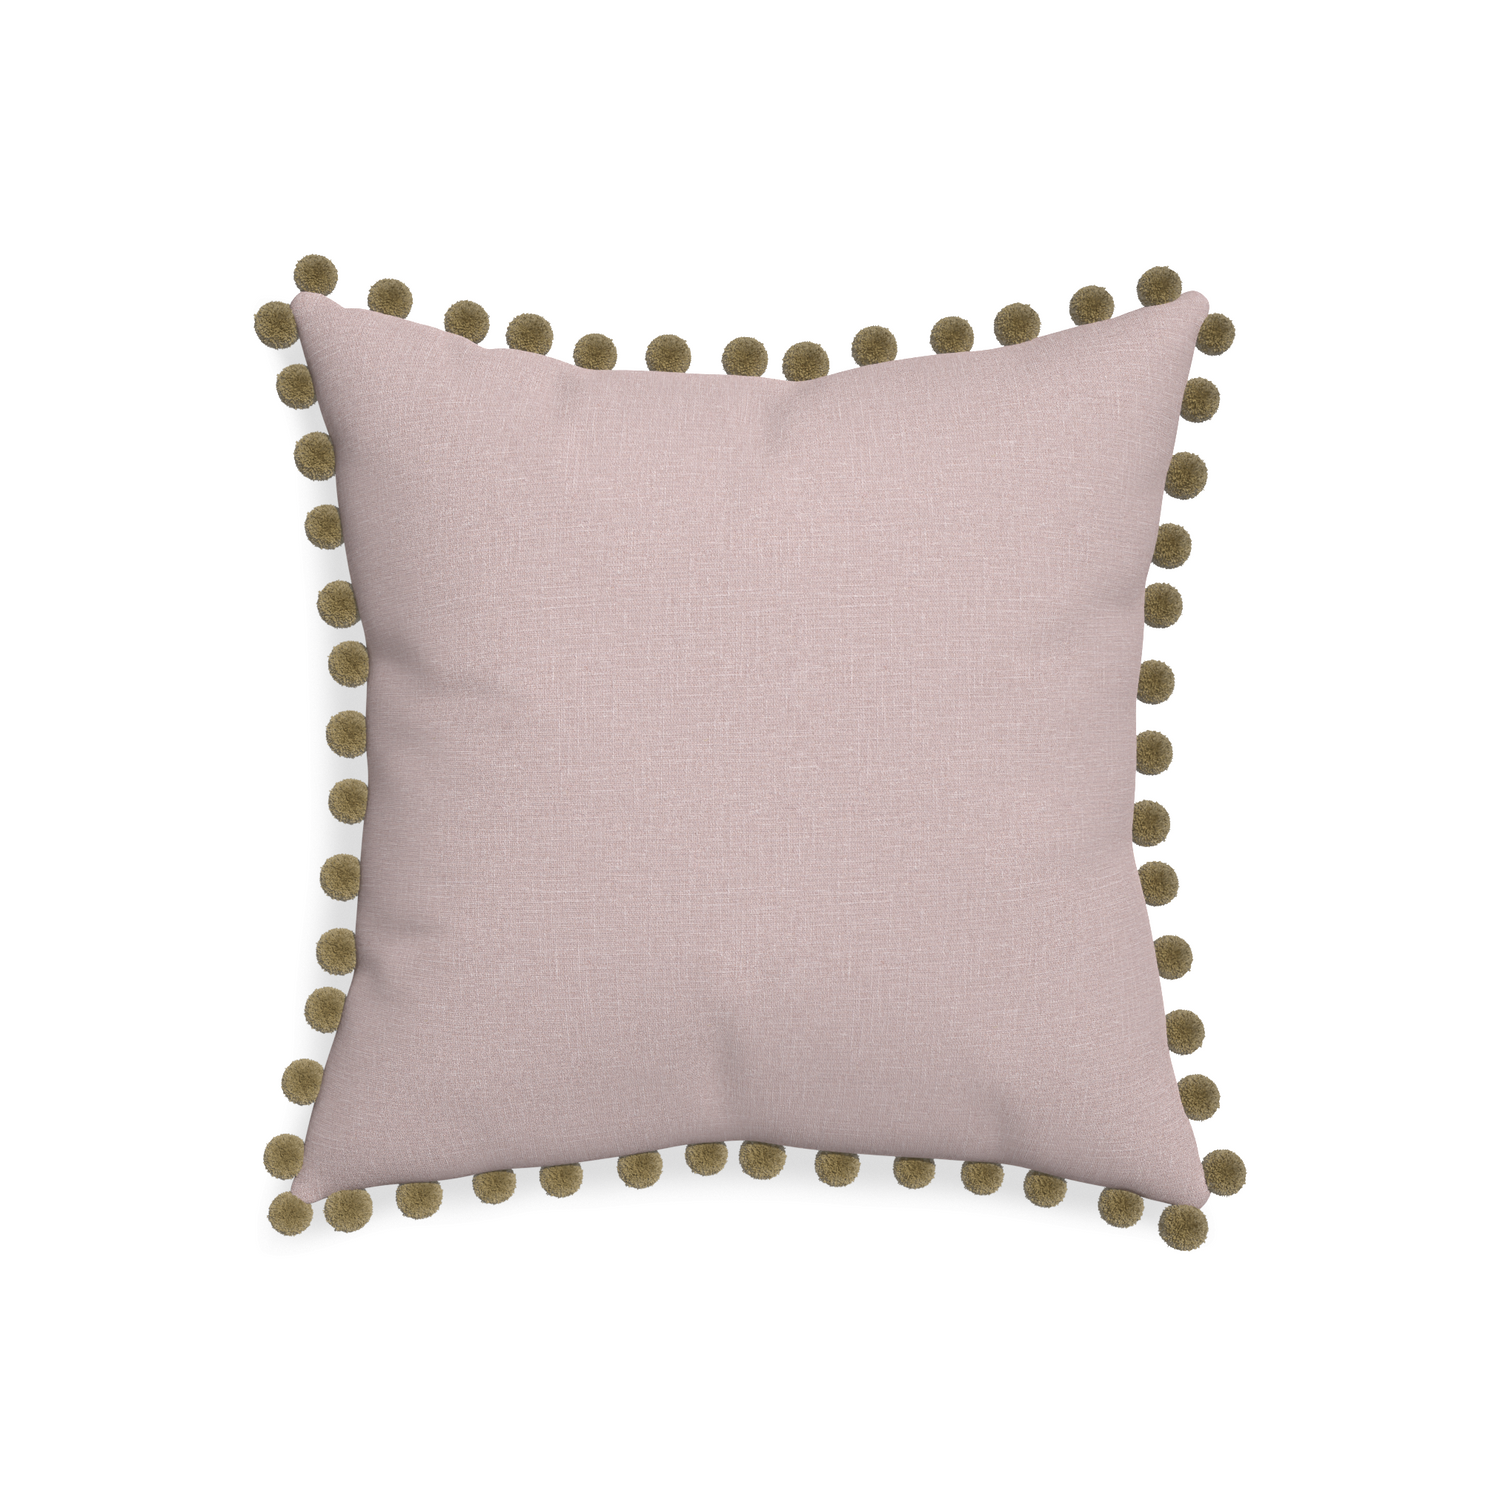 20-square orchid custom mauve pinkpillow with olive pom pom on white background